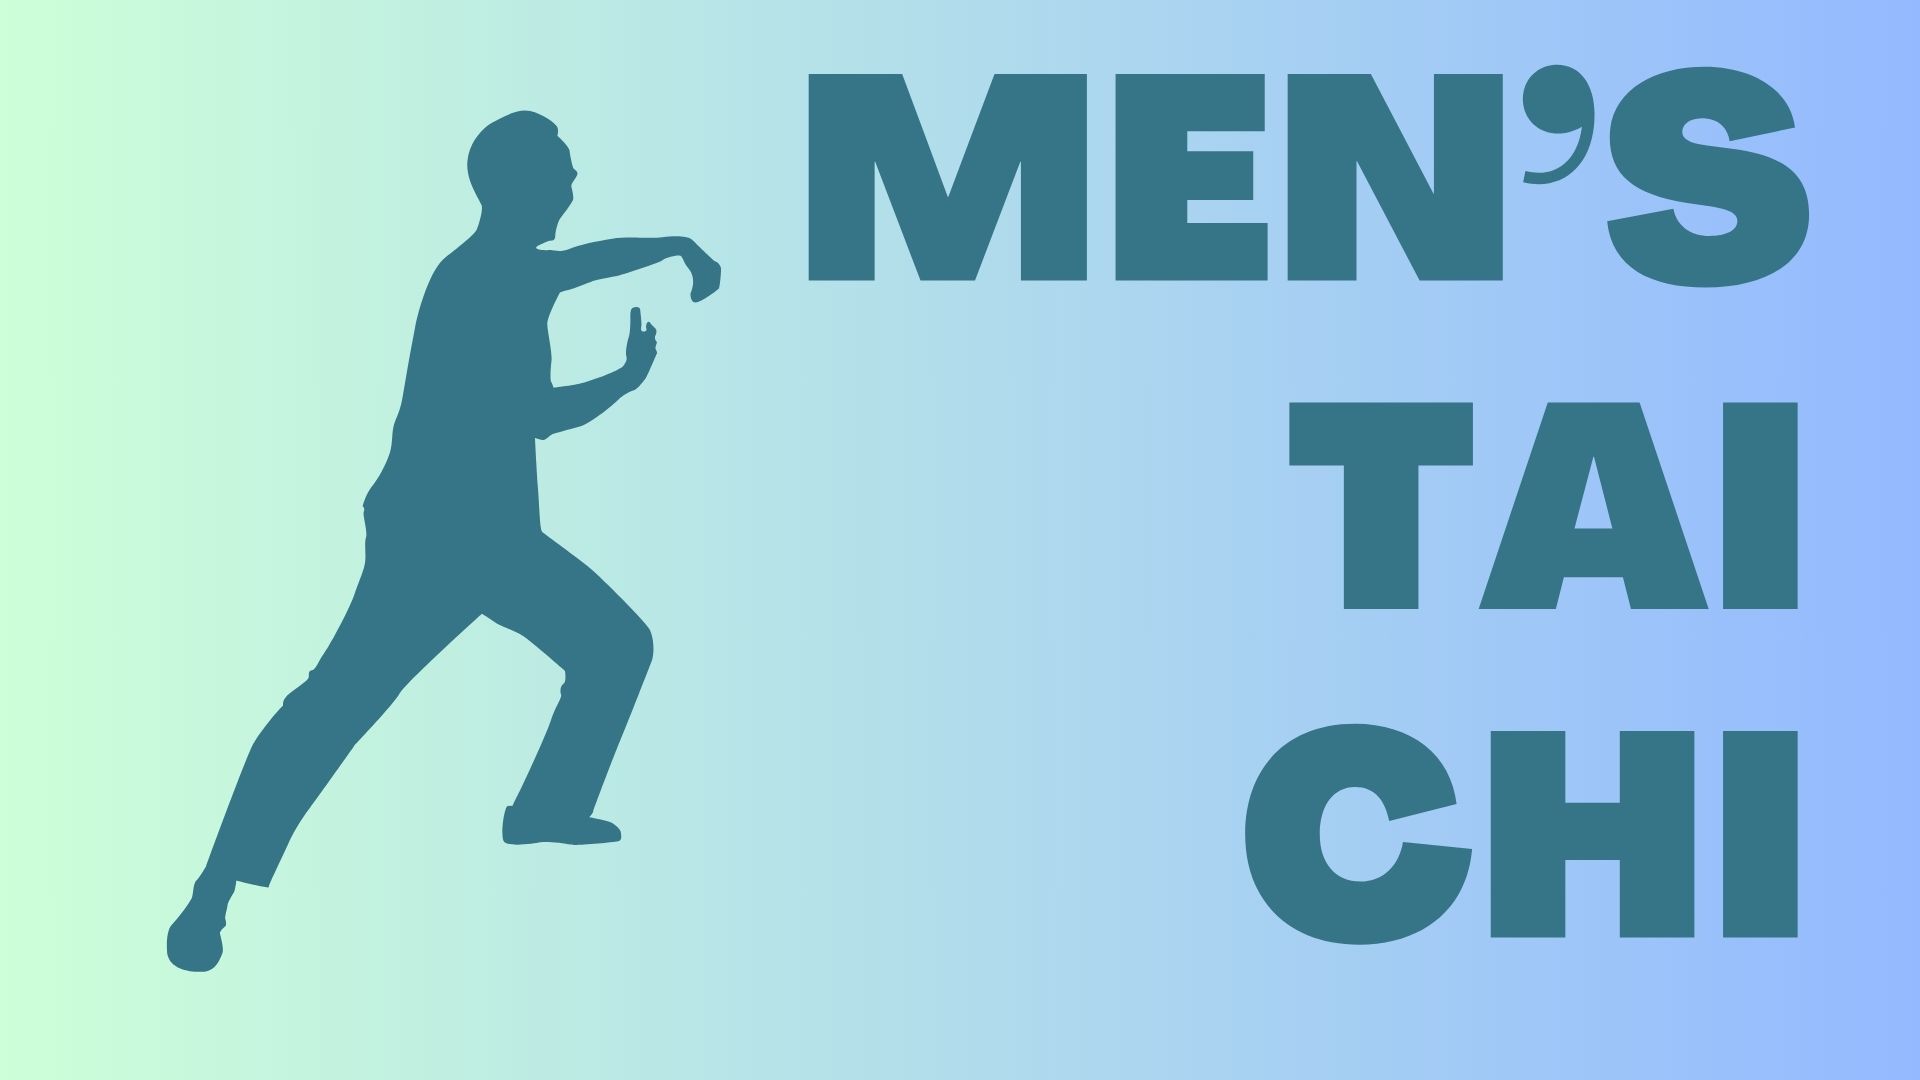 Brewtime Men’s Club – Men’s Tai Chi with Mike Hart